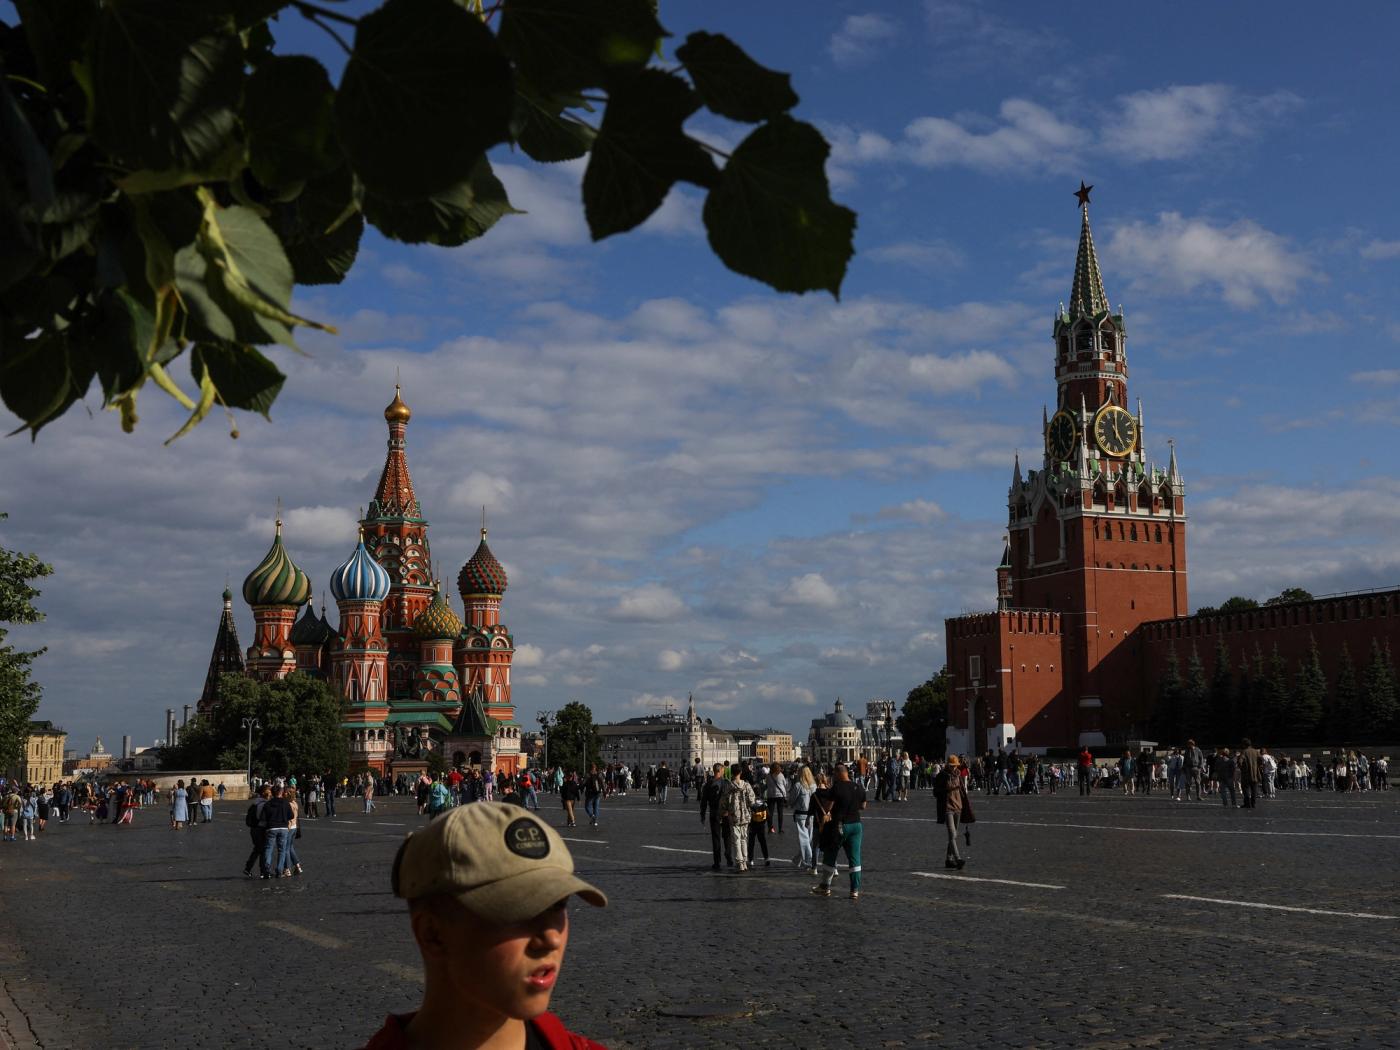 People walk near St. Basil's Cathedral and the Kremlin's Spasskaya Tower in Red Square in central Moscow, Russia July 19, 2023. REUTERS/Evgenia Novozhenina